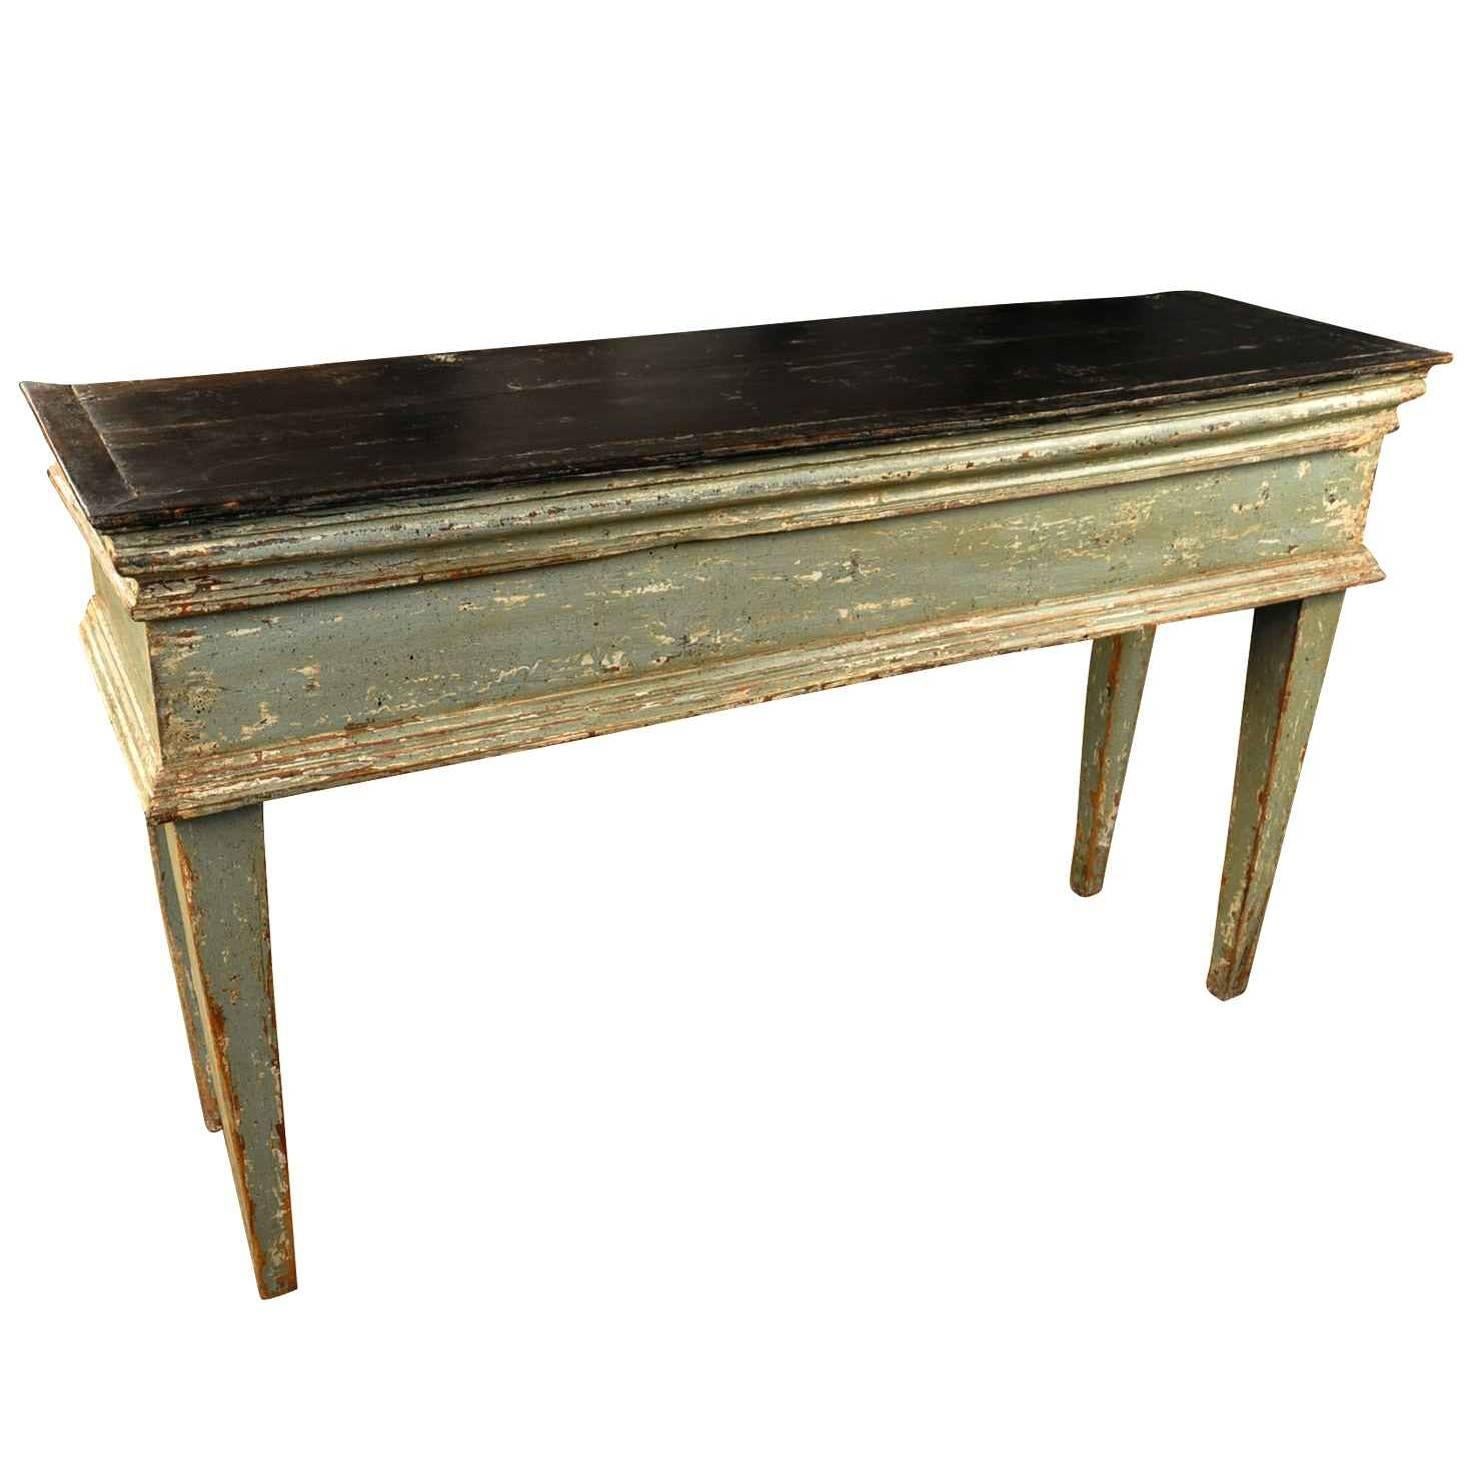 Early 19th Century Spanish Painted Console